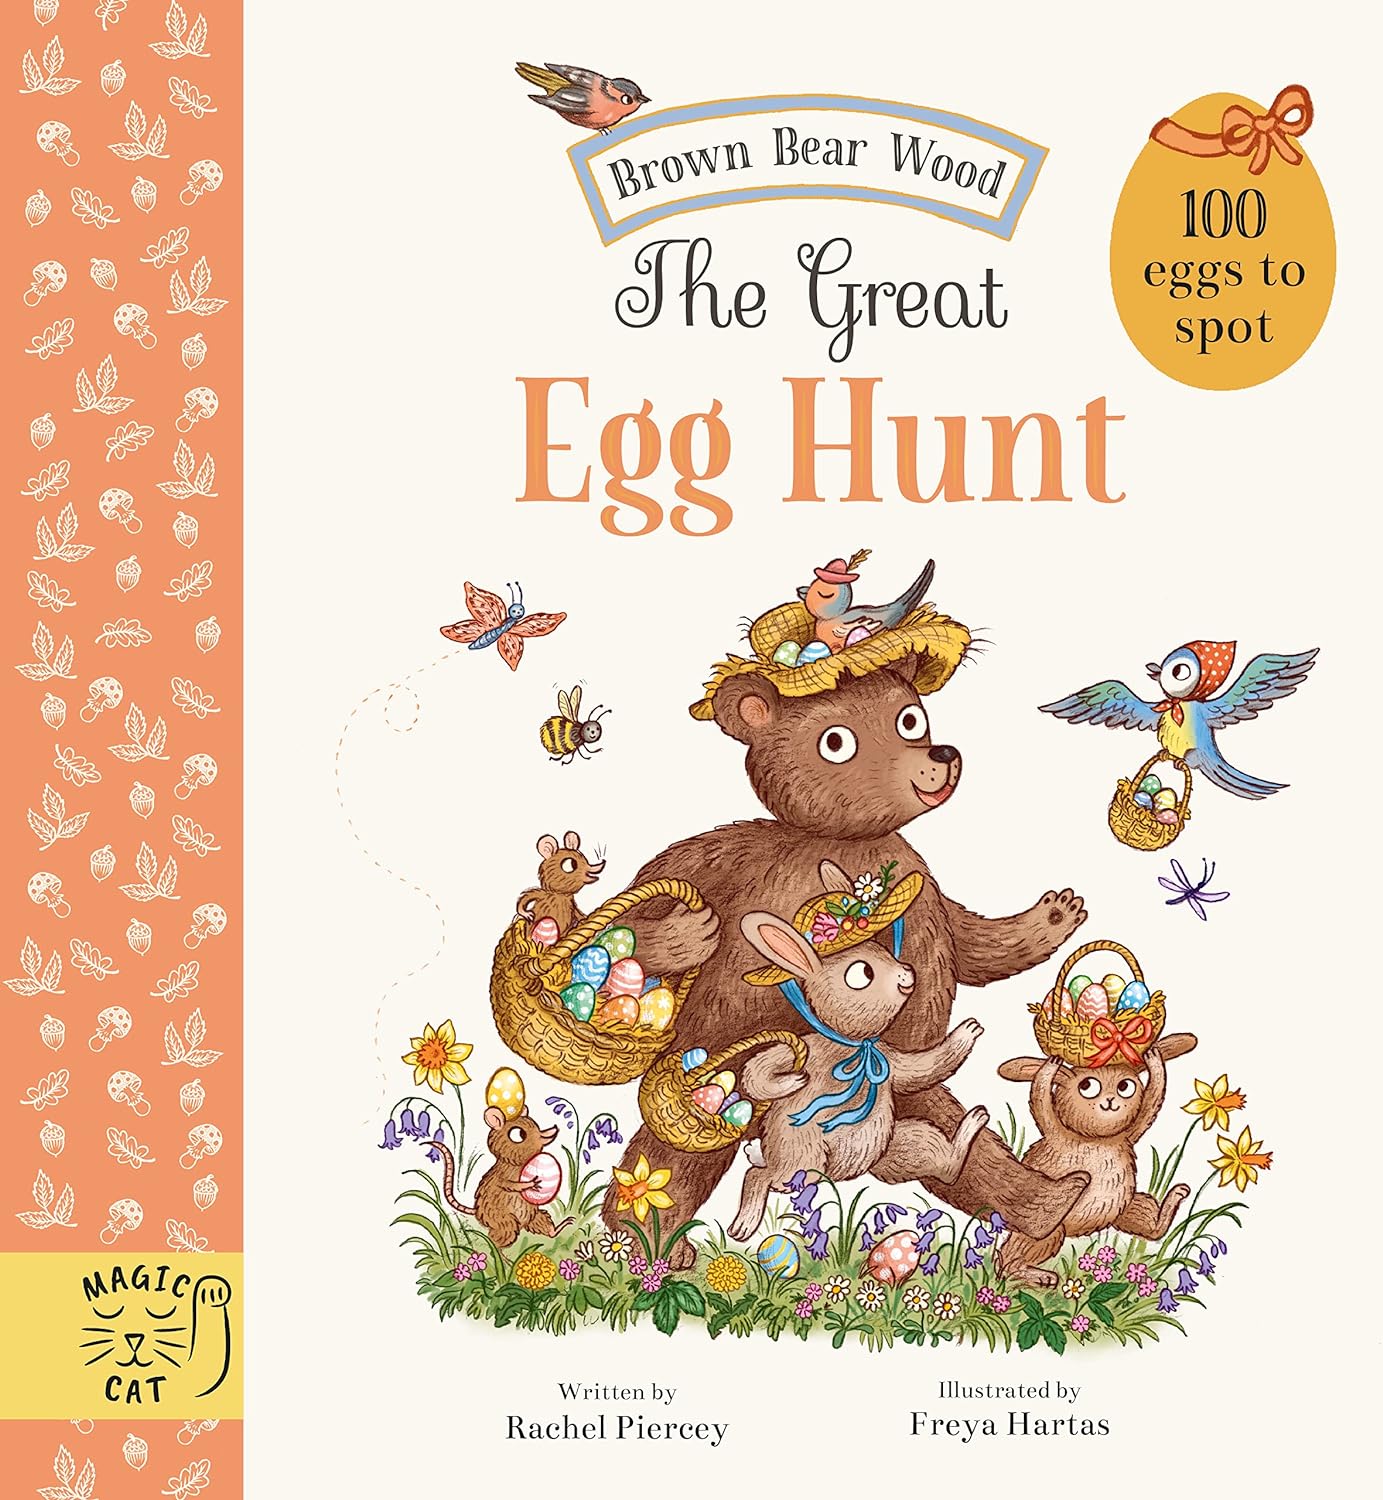 Brown Bear Wood: The Great Egg Hunt